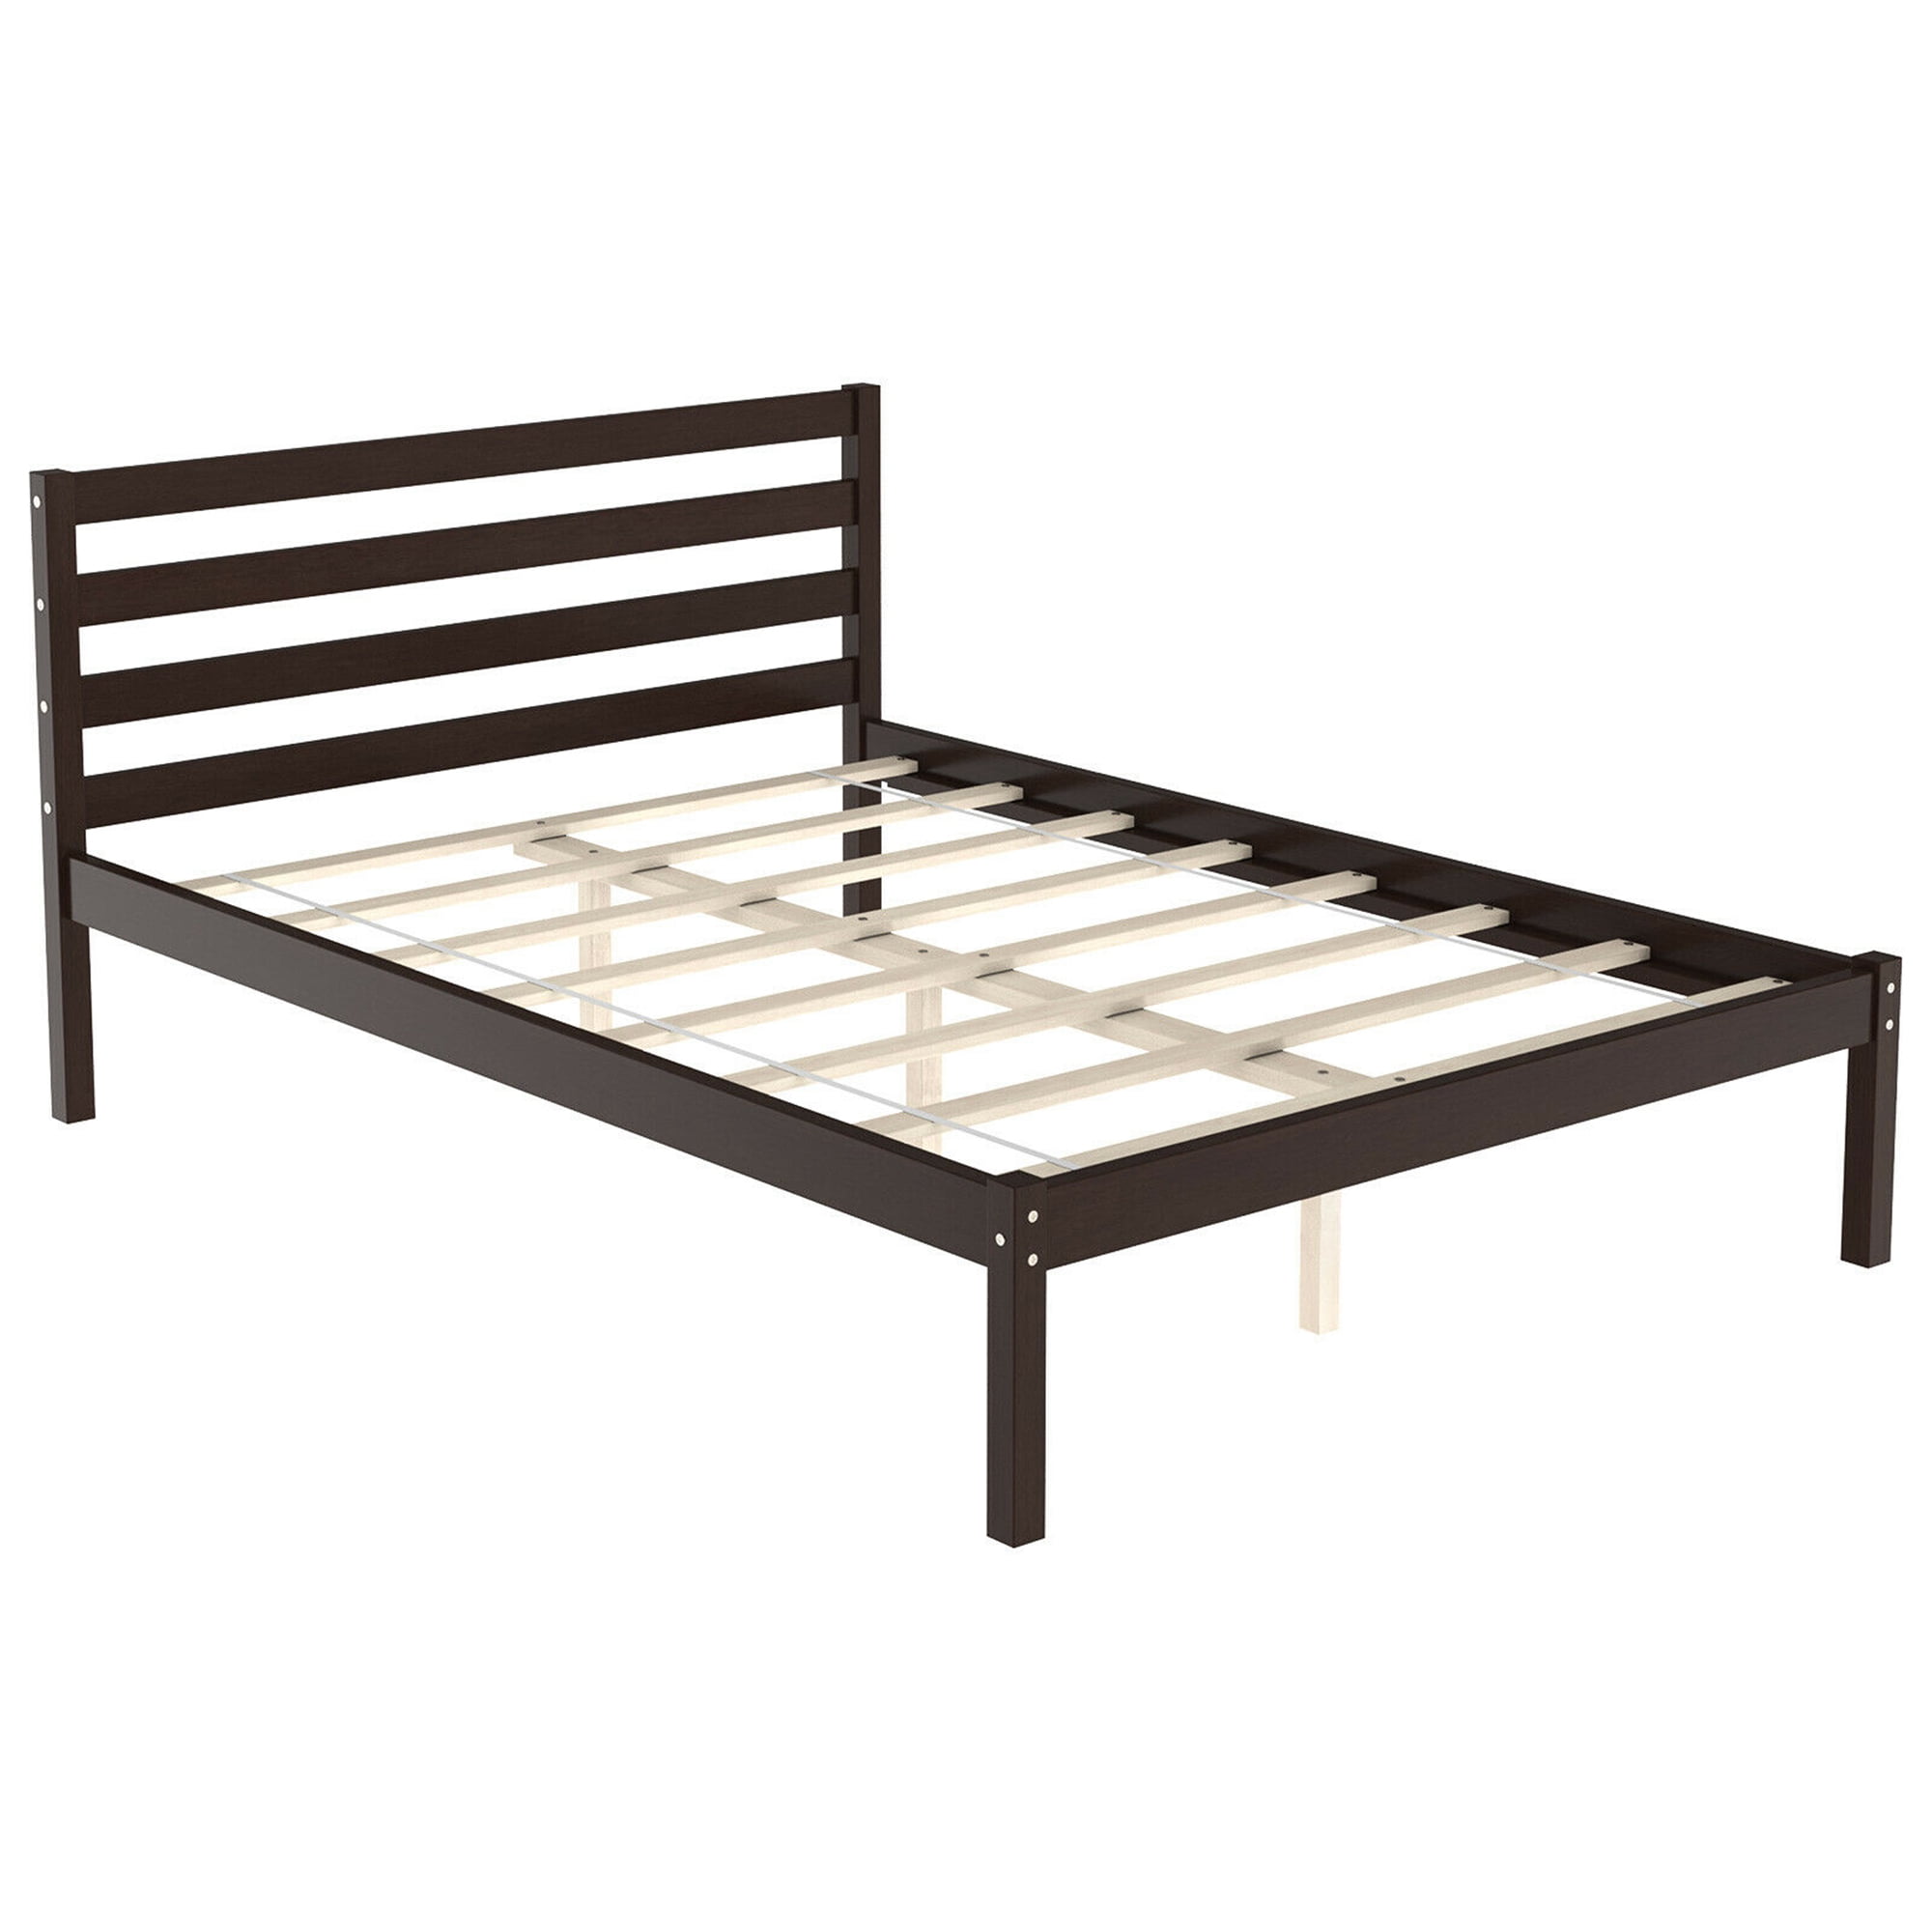 Gymax Full Wood Platform Bed Frame, Avey Bed Frame By Mercury Row